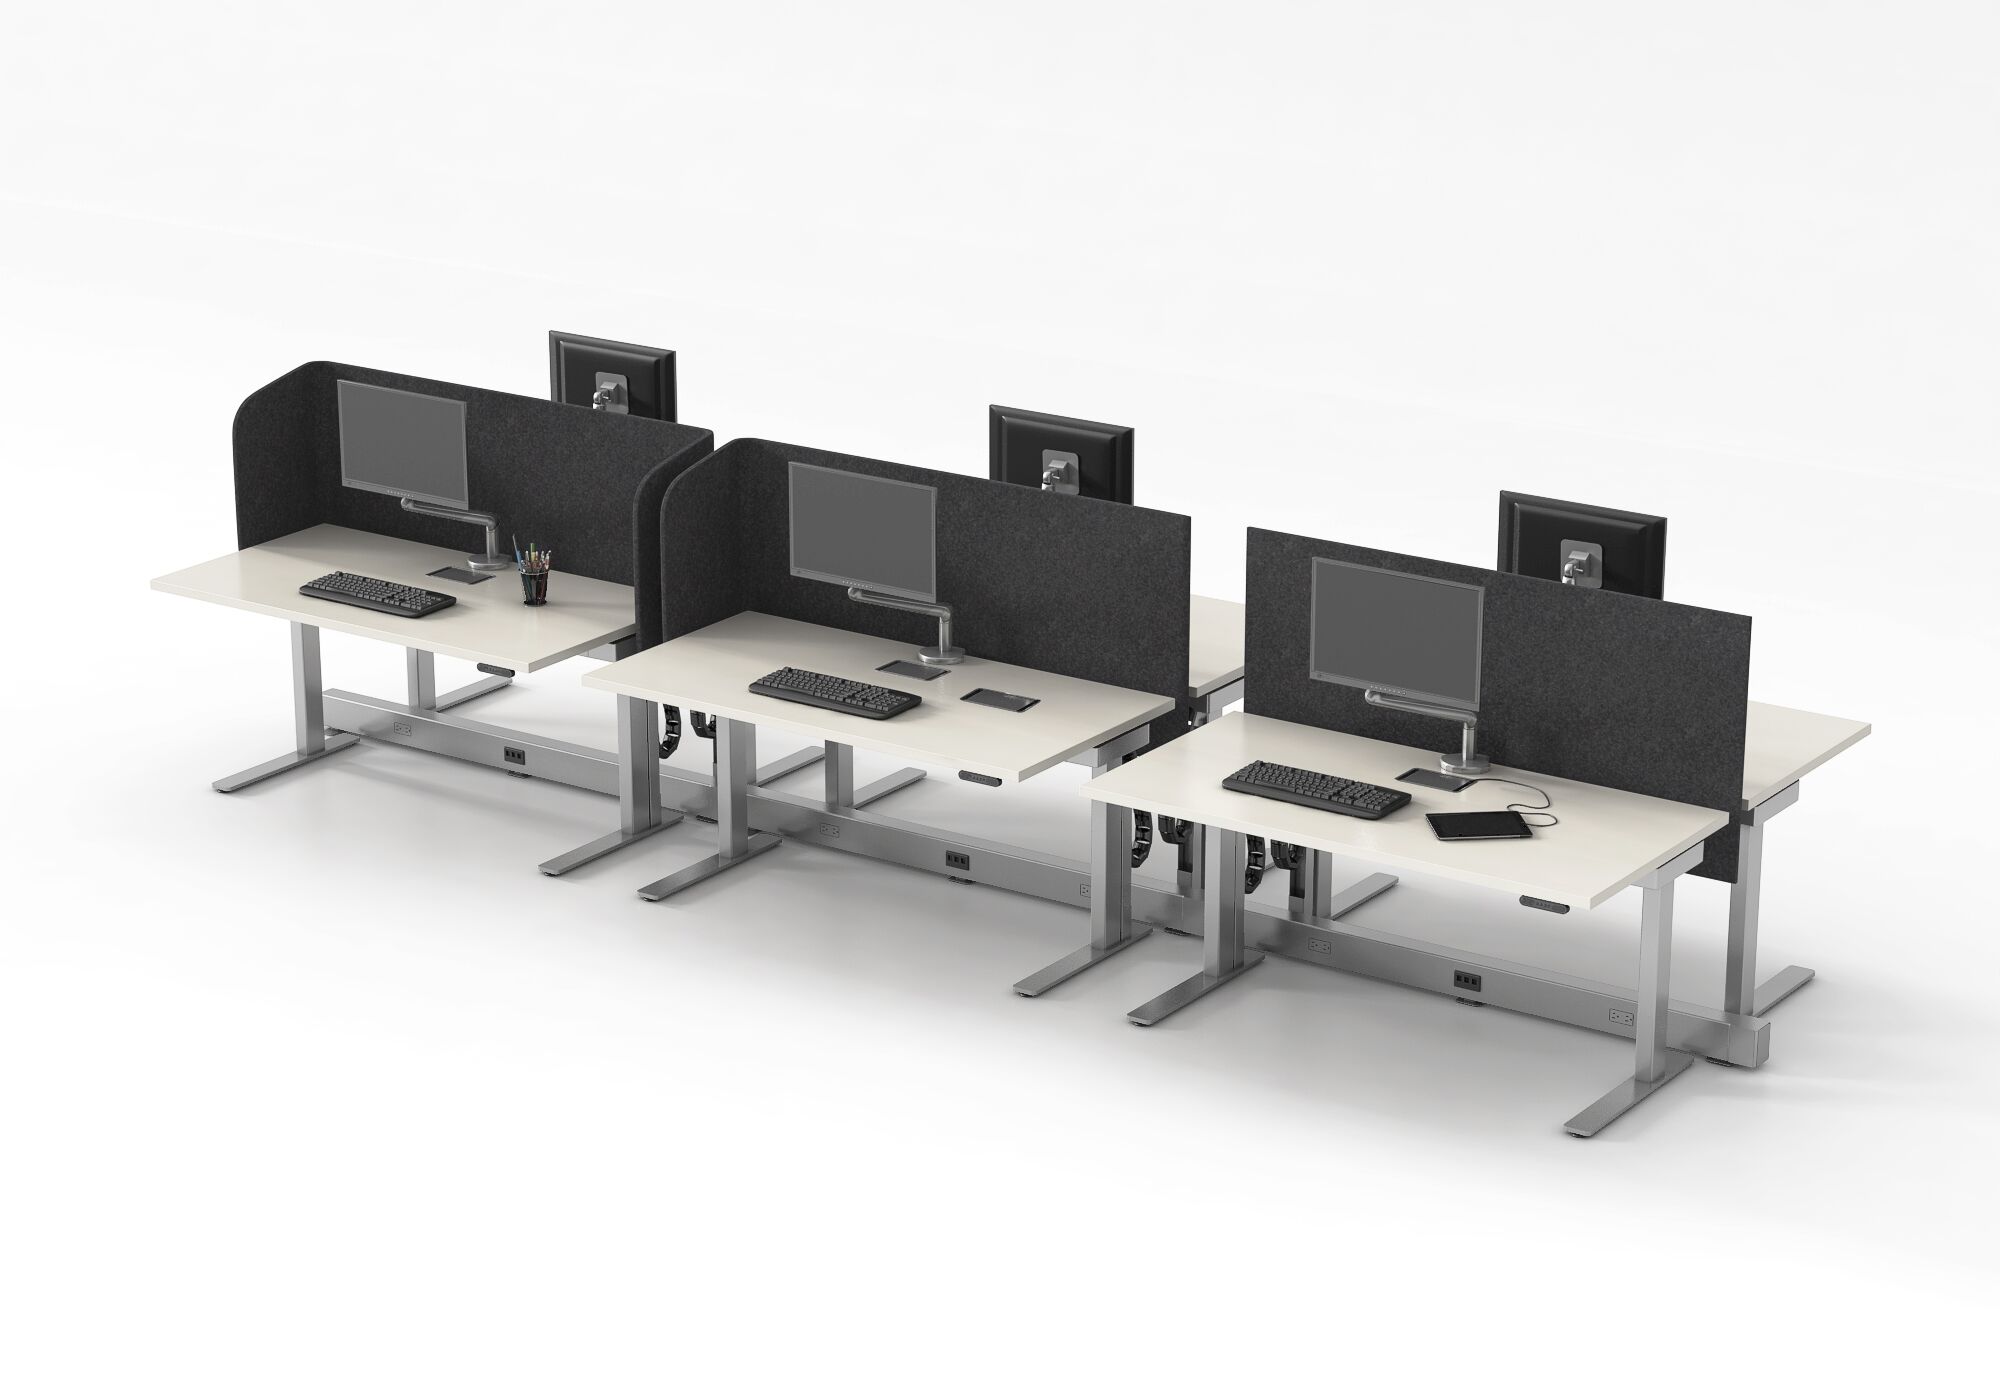 Allsteel Altitude A8 three workstations side by side